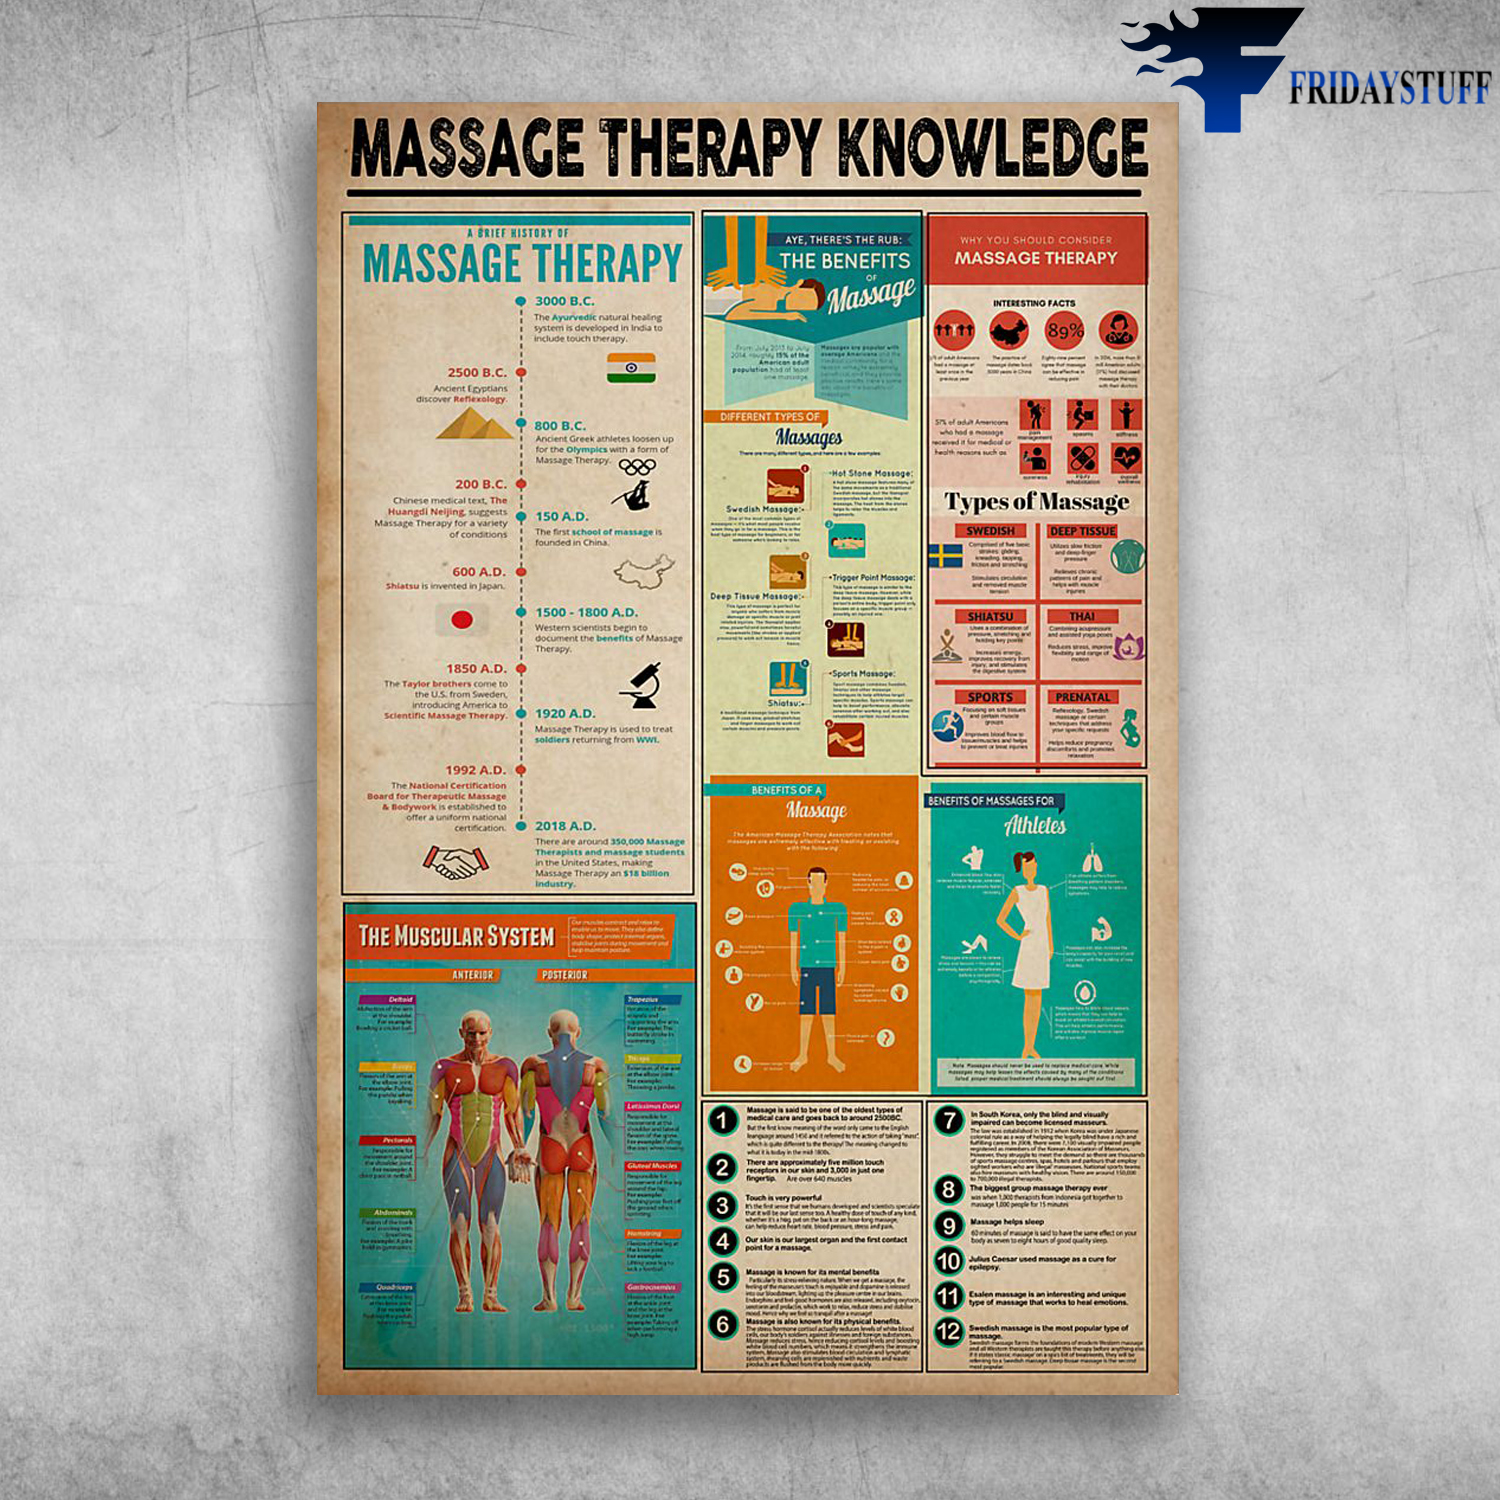 Massage Therapy Knowledge The Benefits Of Massage